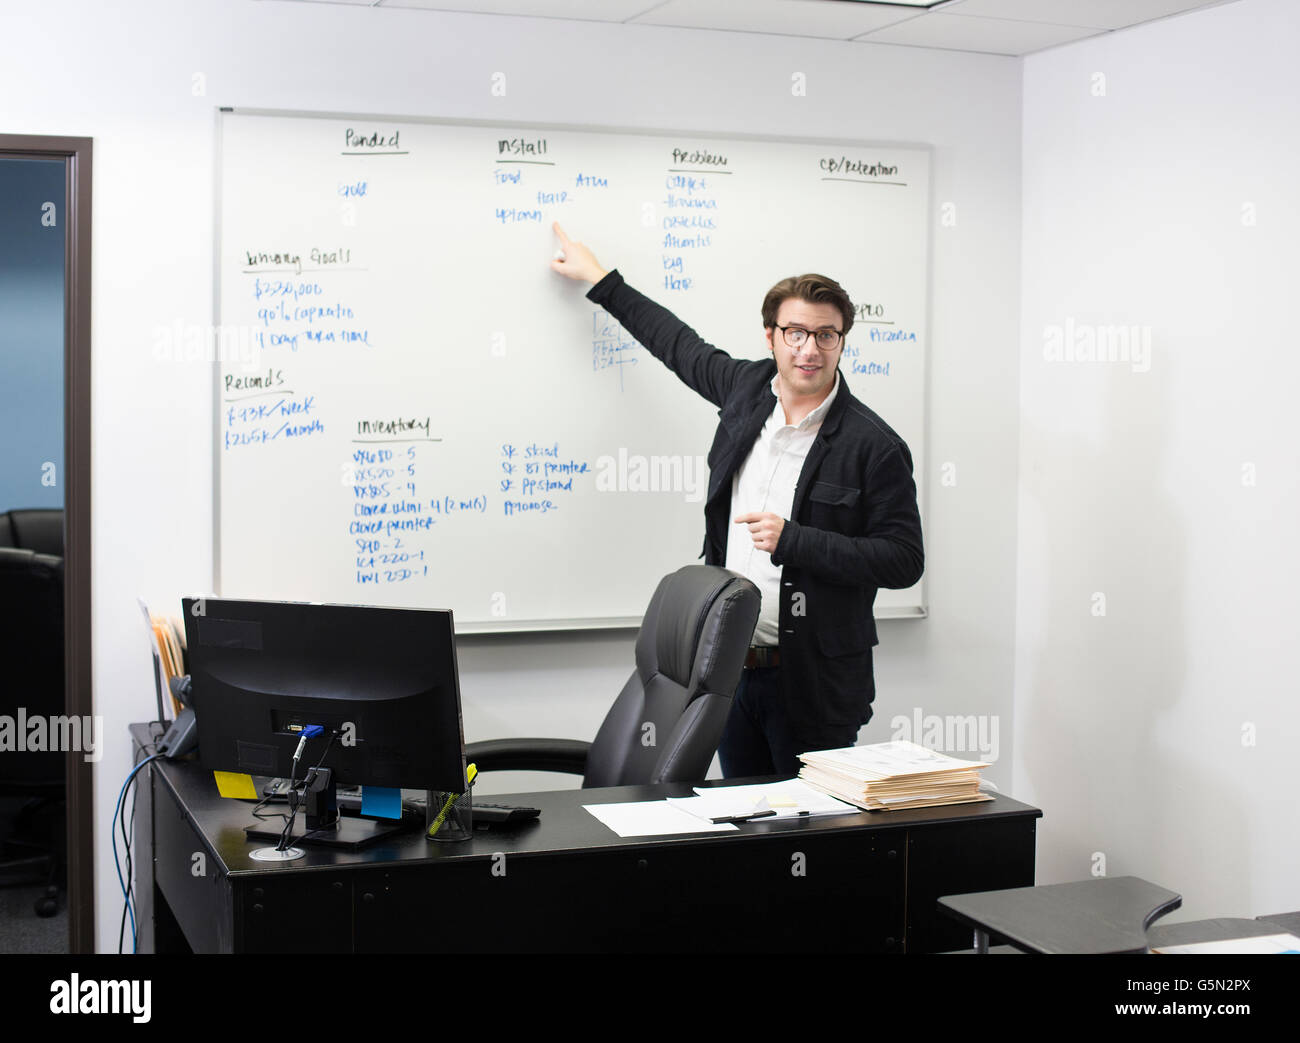 Caucasian businessman pointing to whiteboard in office Stock Photo